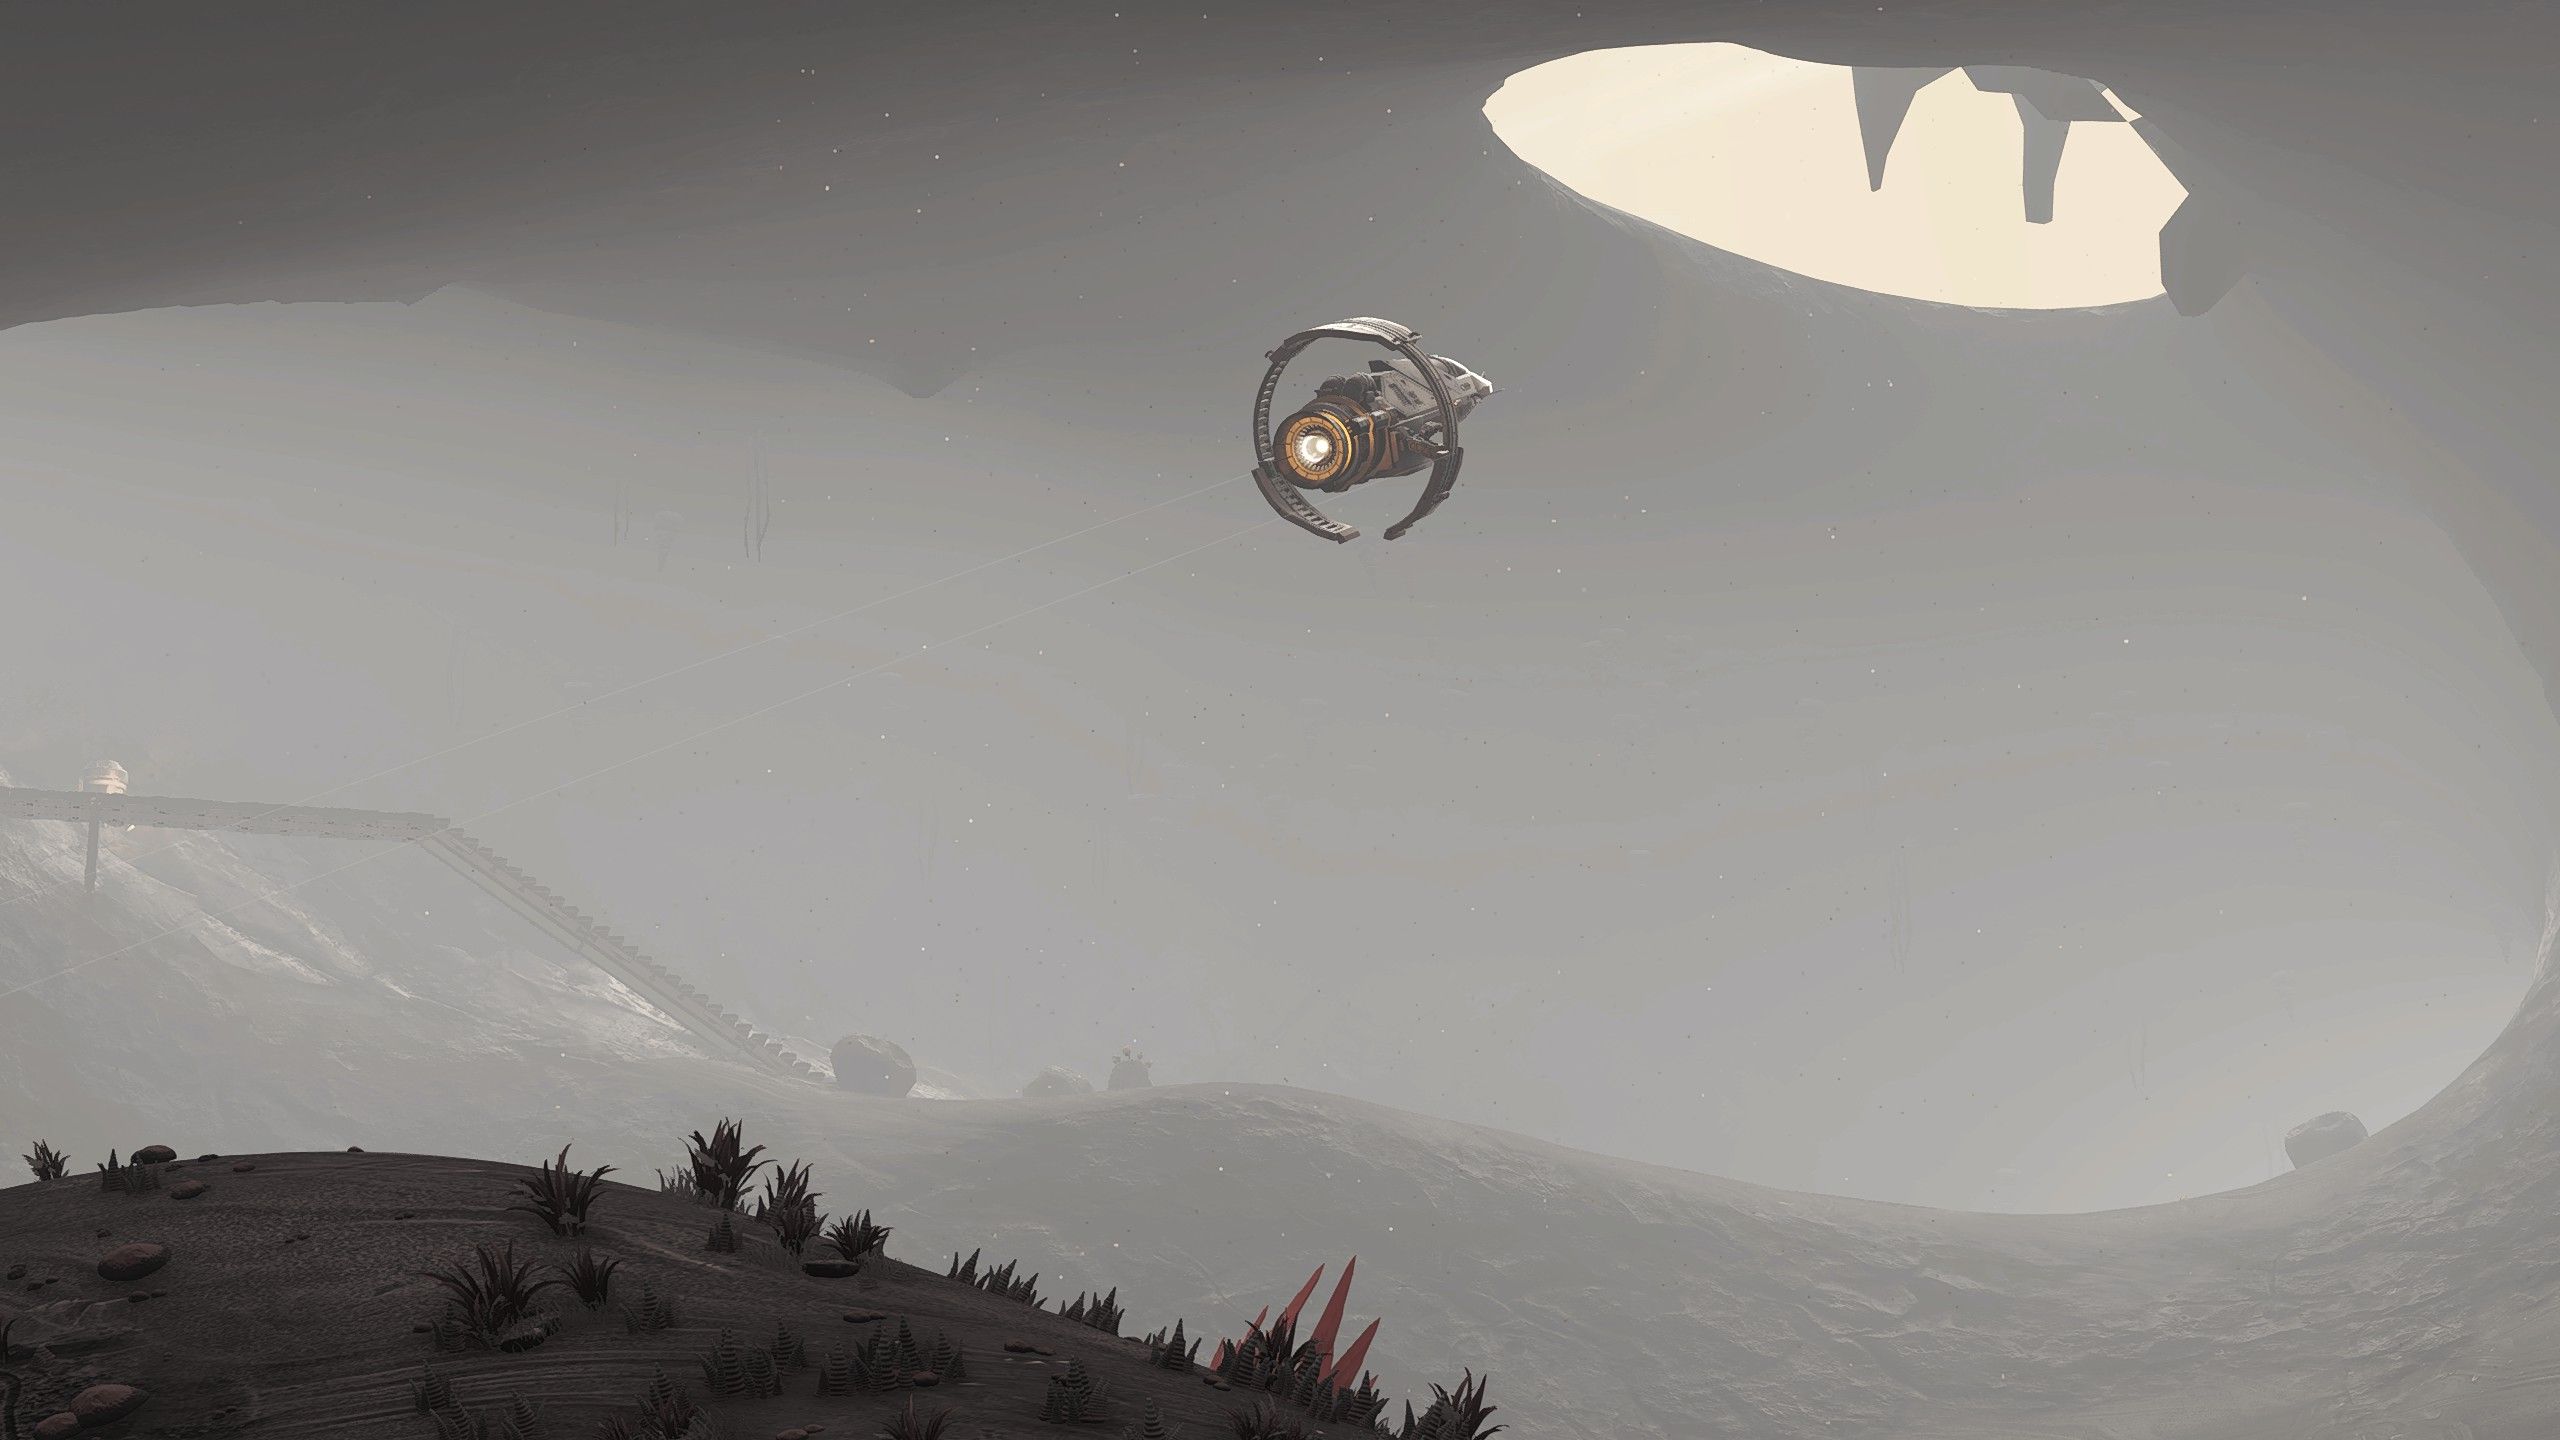 Amazing photos of space as captured in No Mans Sky image 9